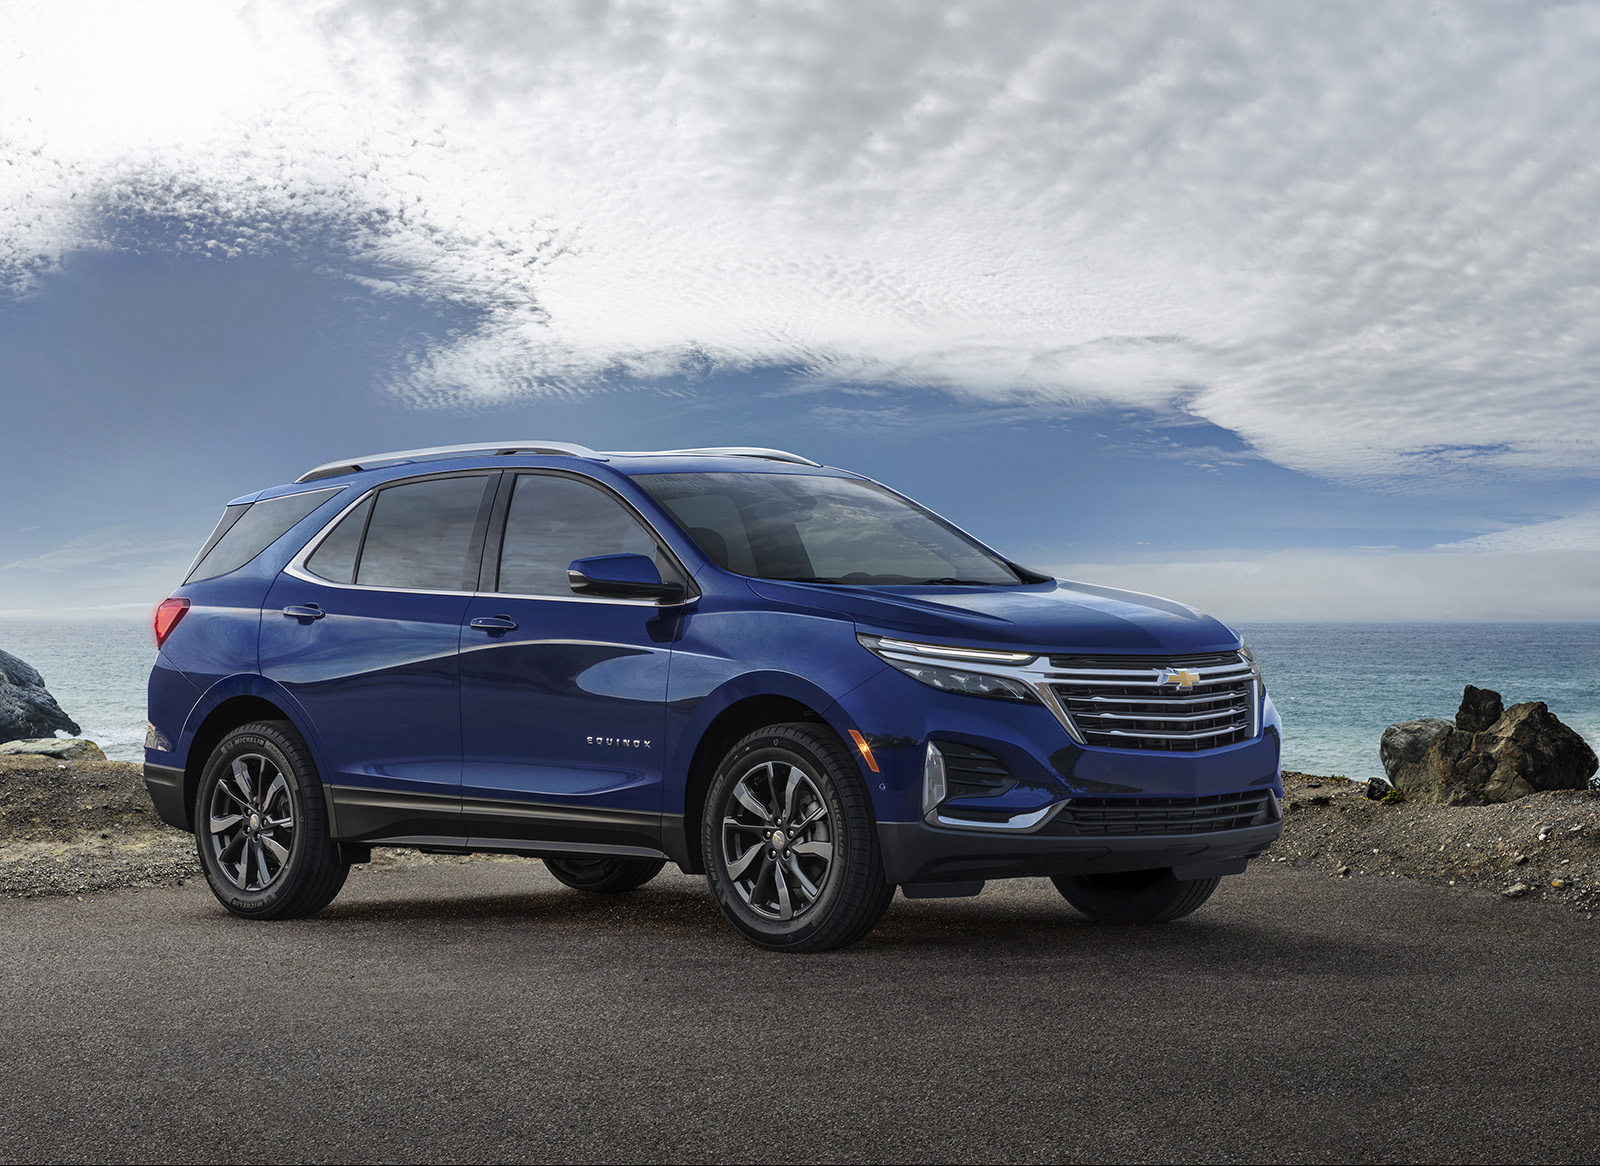 2022 Chevrolet Equinox: Style and Equipment in Progress, 2.0 Engine Out -  autoevolution